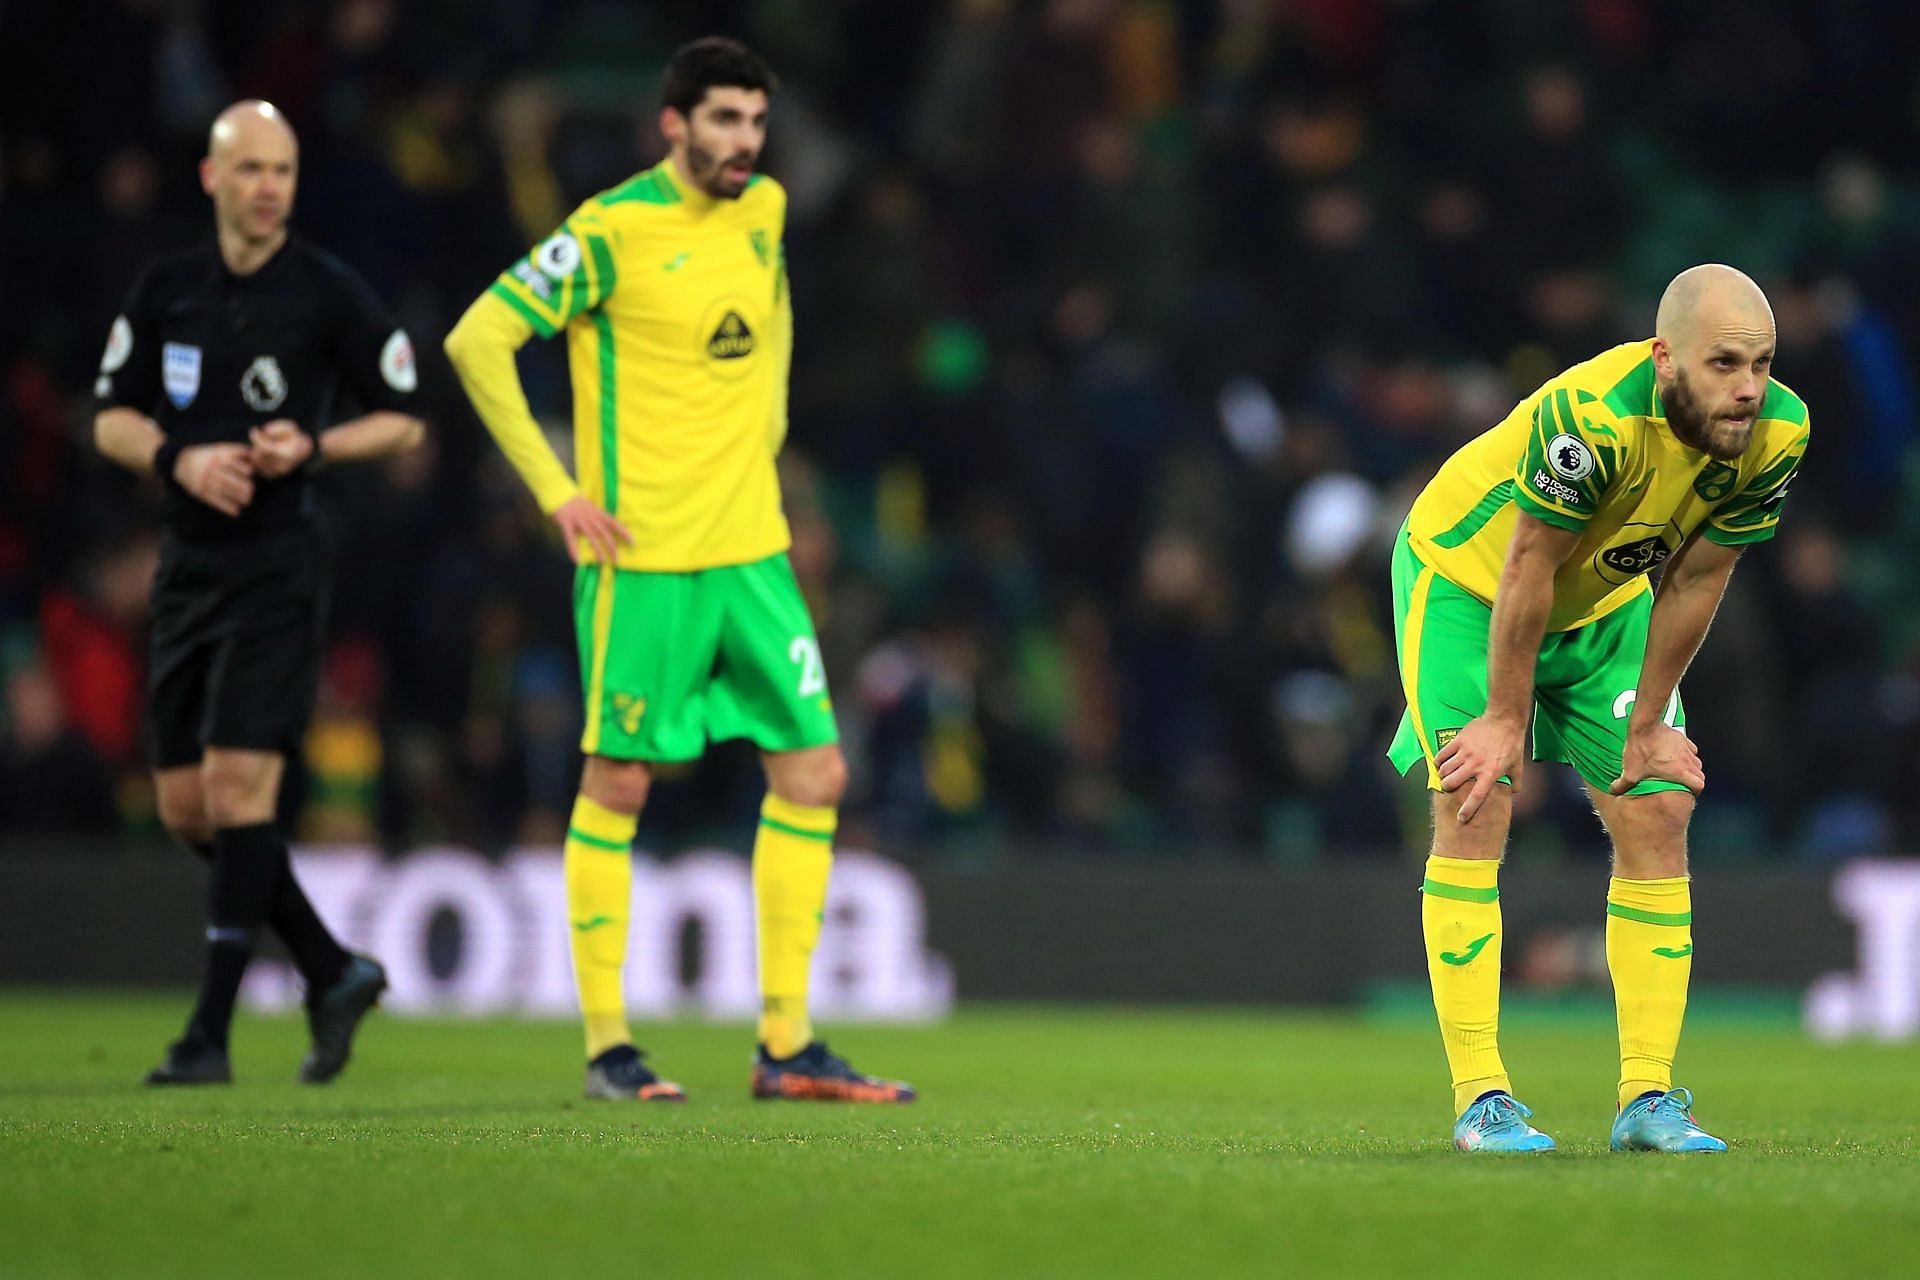 Norwich have a tendency to do well in the lower division but fail to perform in the Premier League